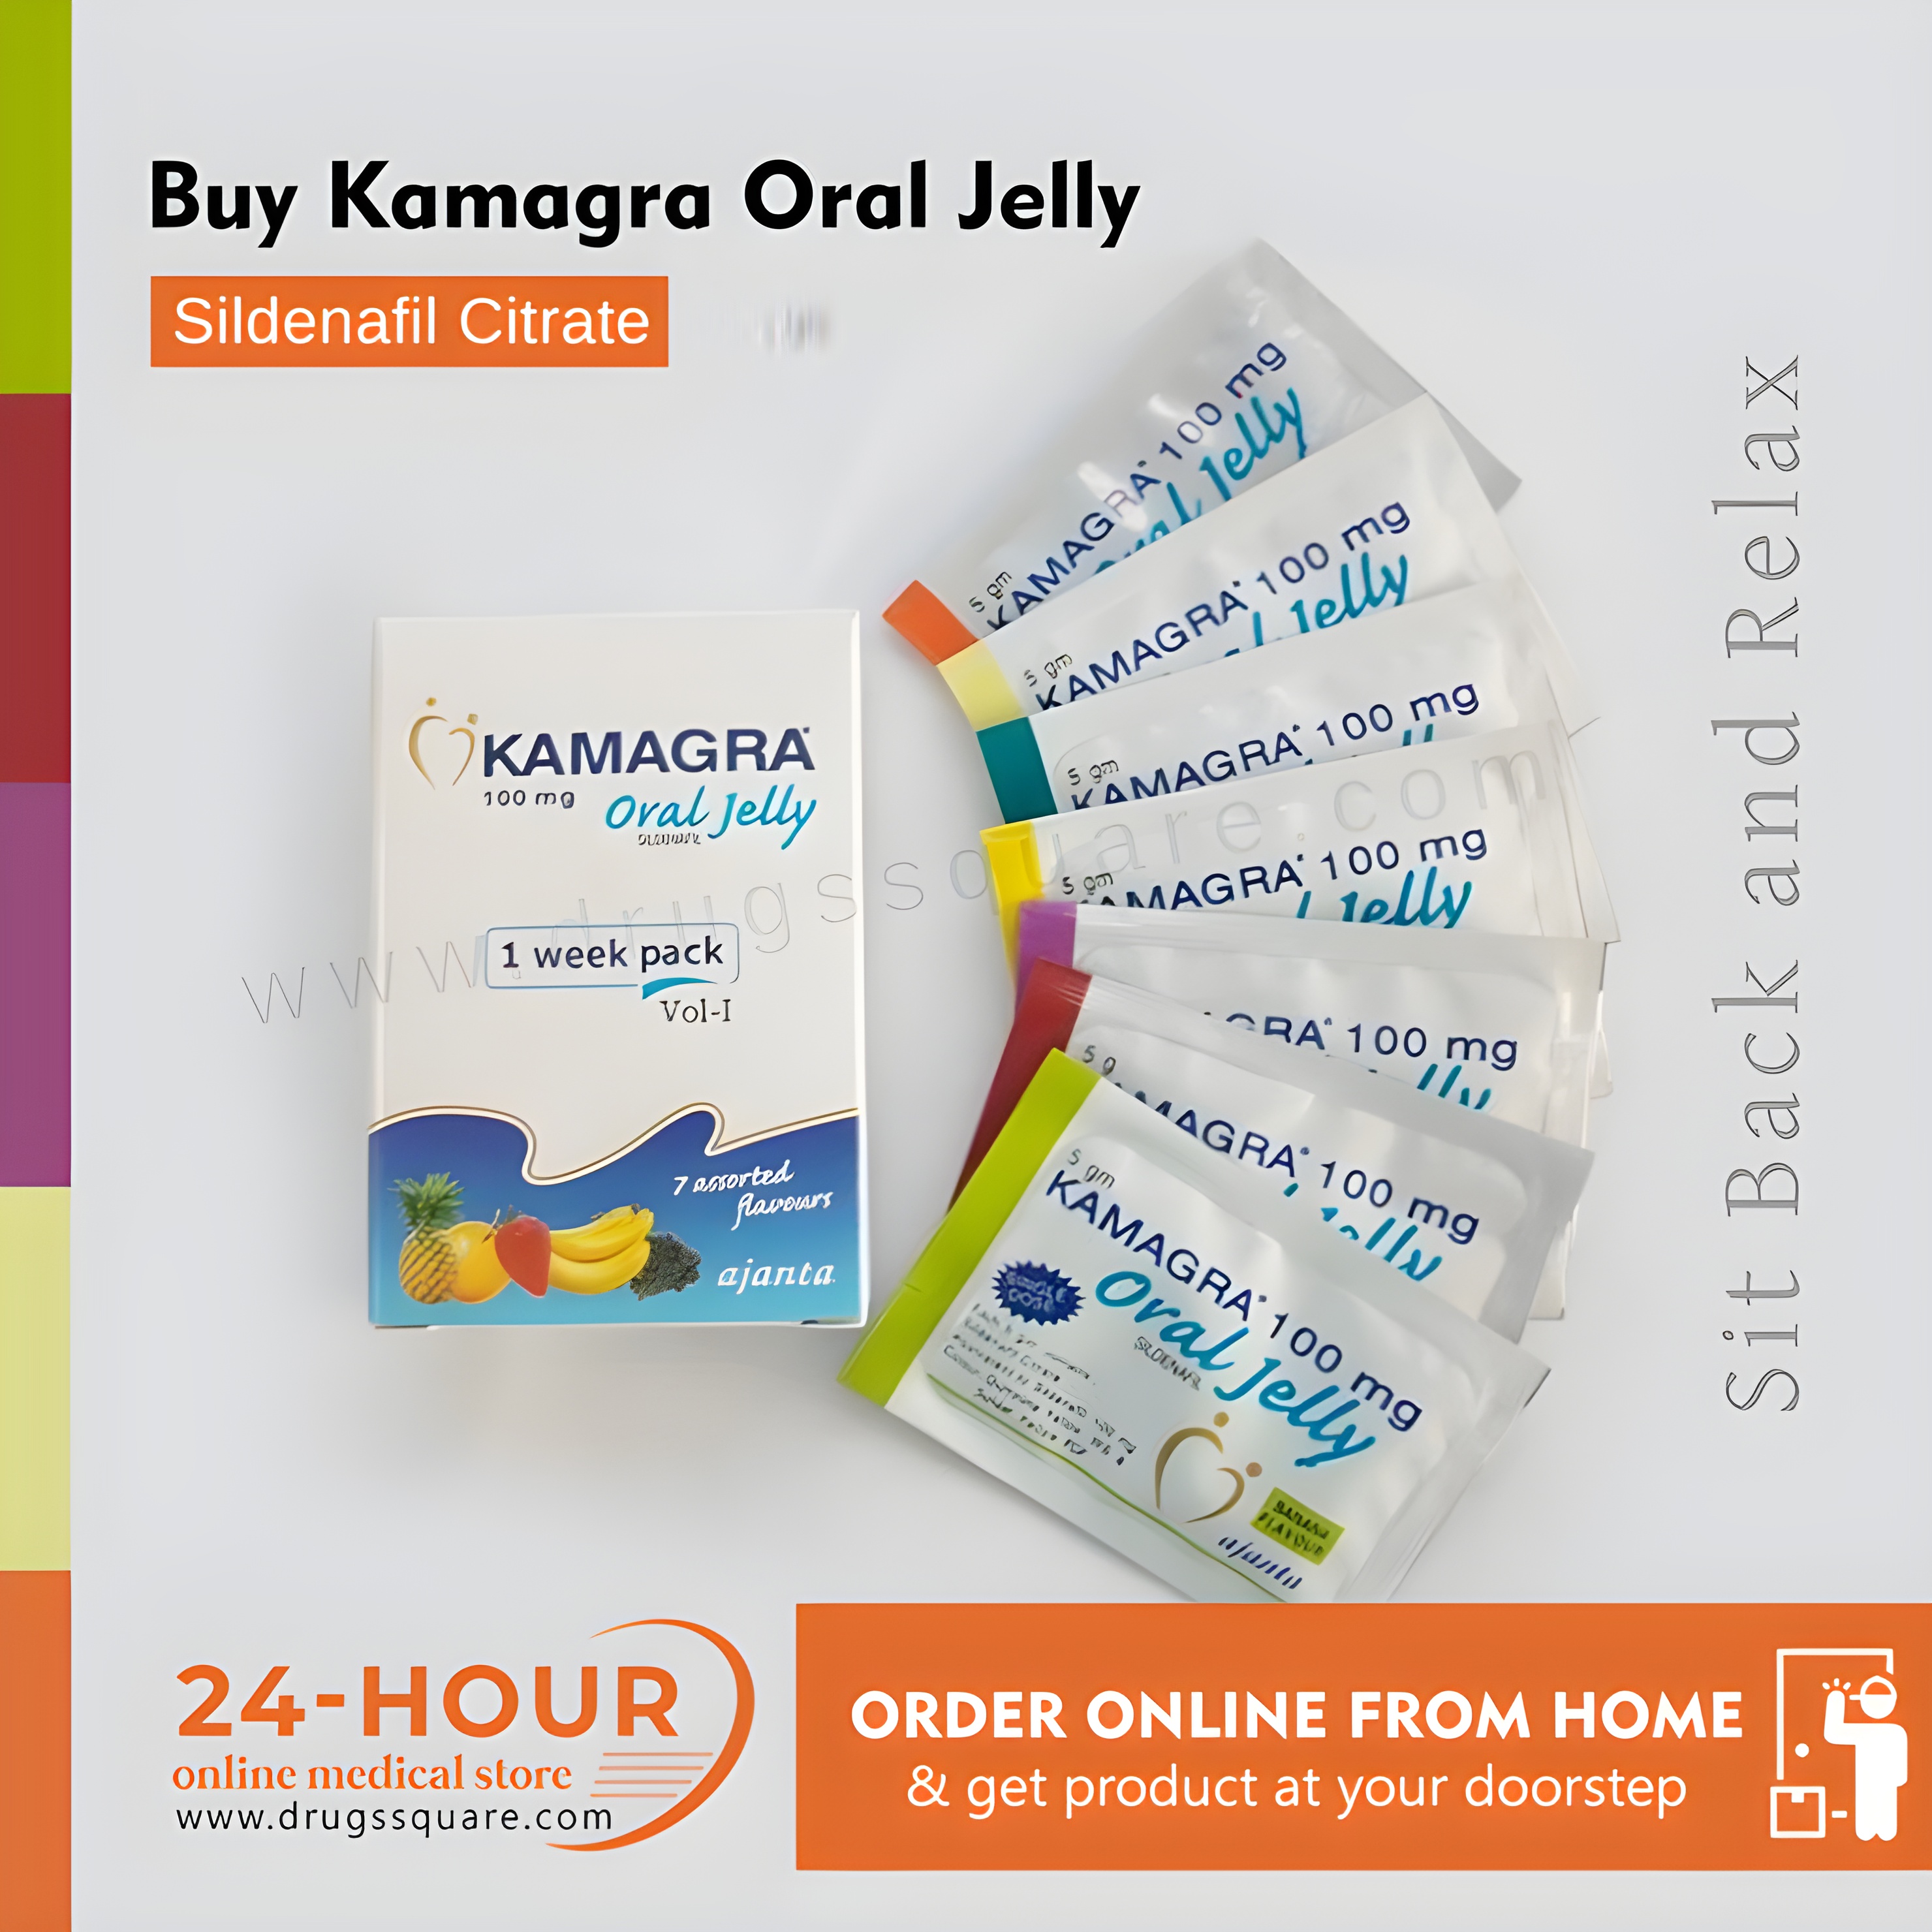 Kamagra Oral Jelly Price - Sildenafil Citrate 100mg รูปที่ 1